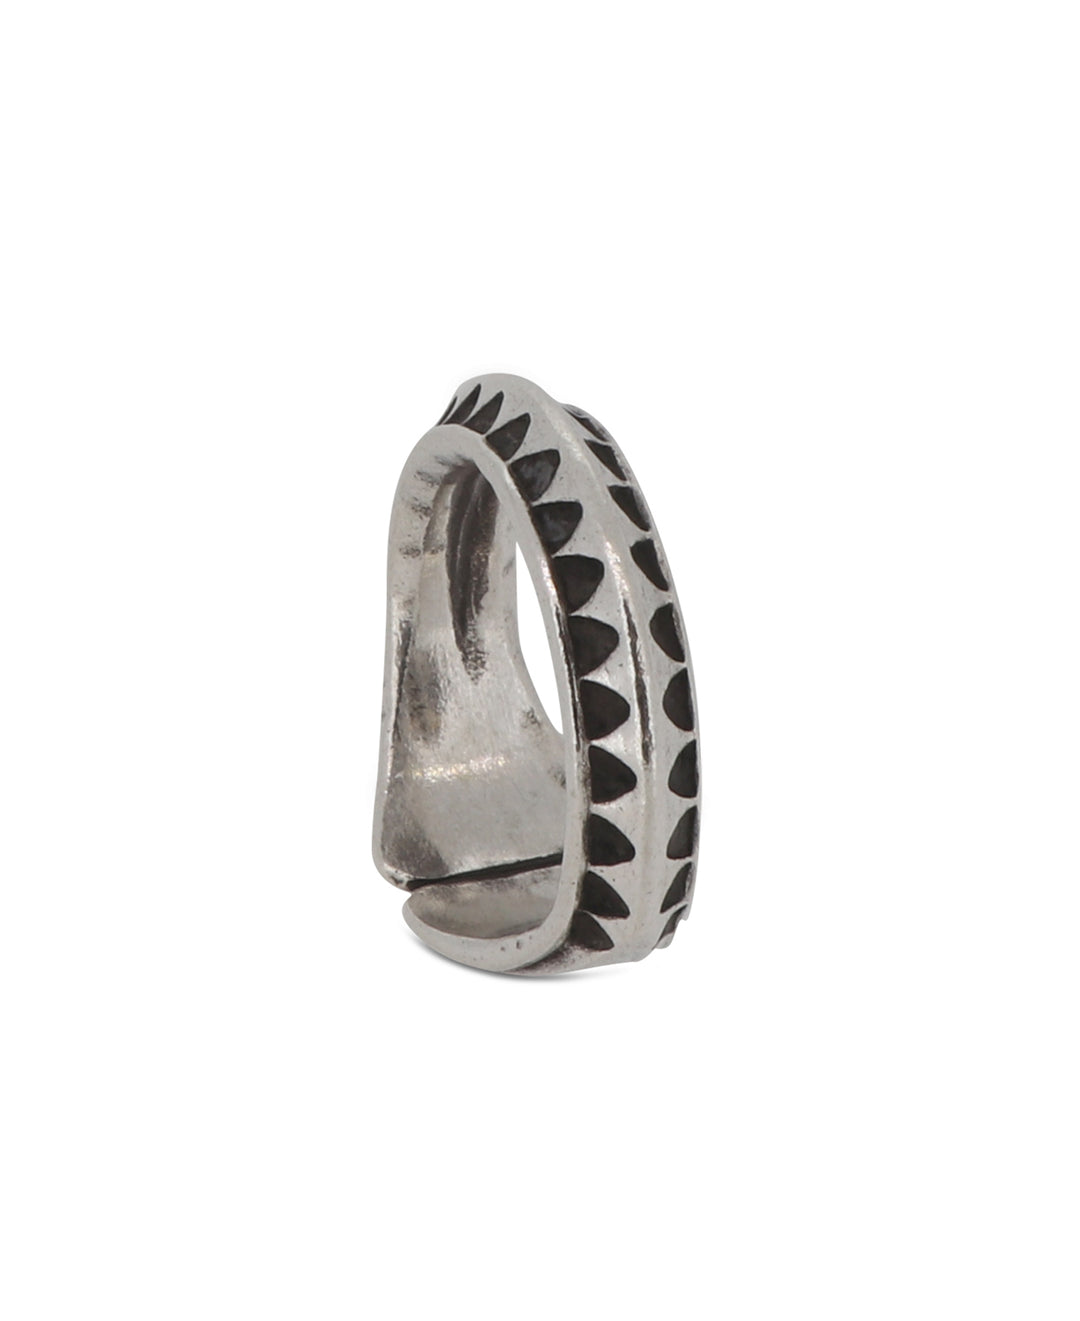 Hand hammered hilltribe silver band ring for men